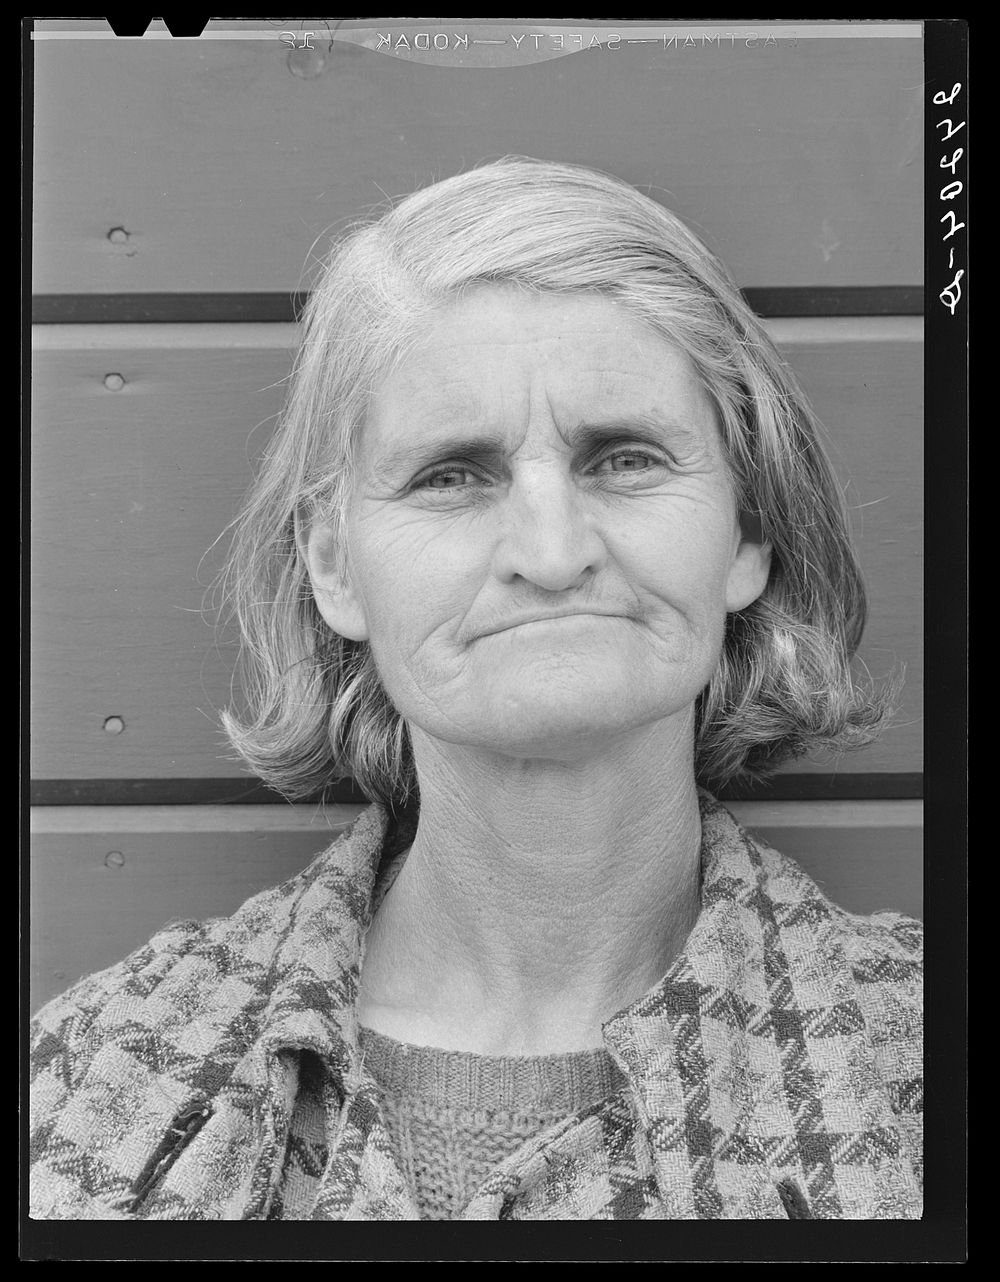 Wife of migrant. Tulare migrant camp. Visalia, California. Sourced from the Library of Congress.